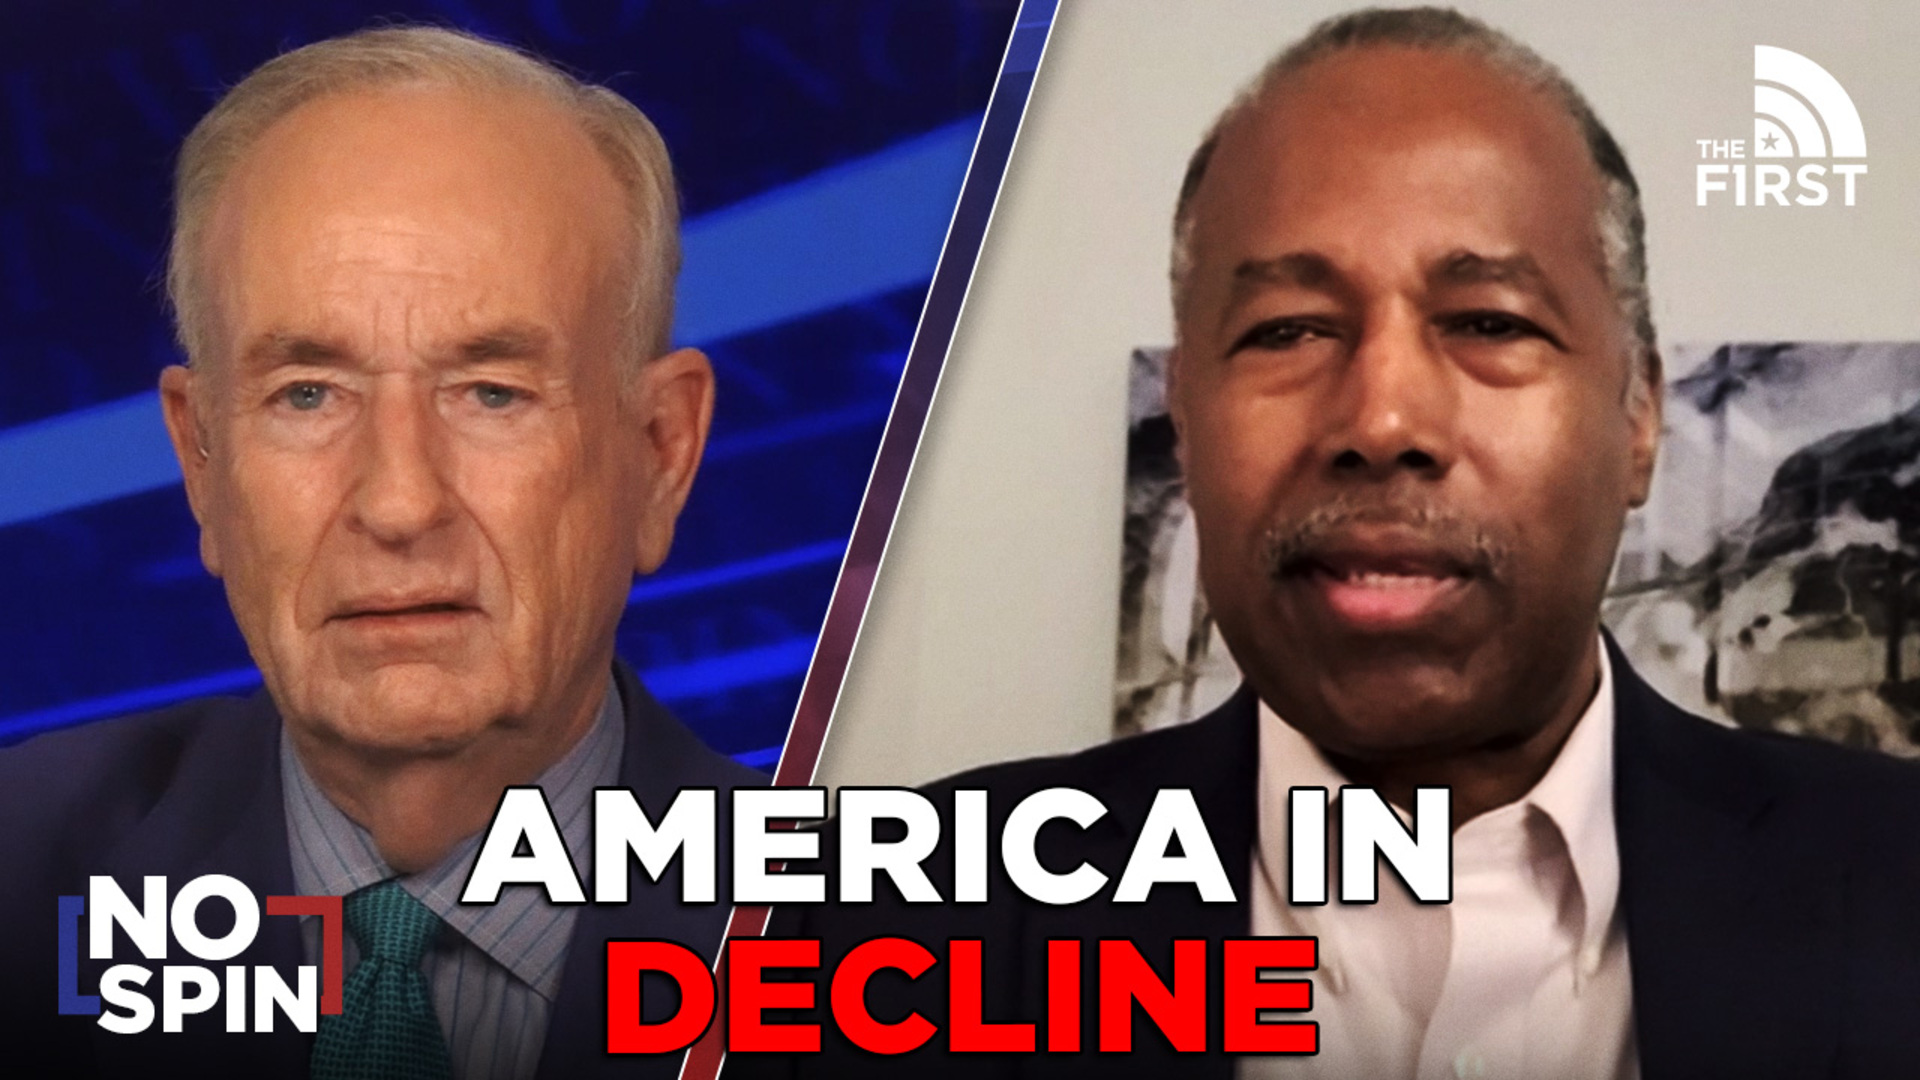 WATCH: Our Culture is in Crisis – with Ben Carson